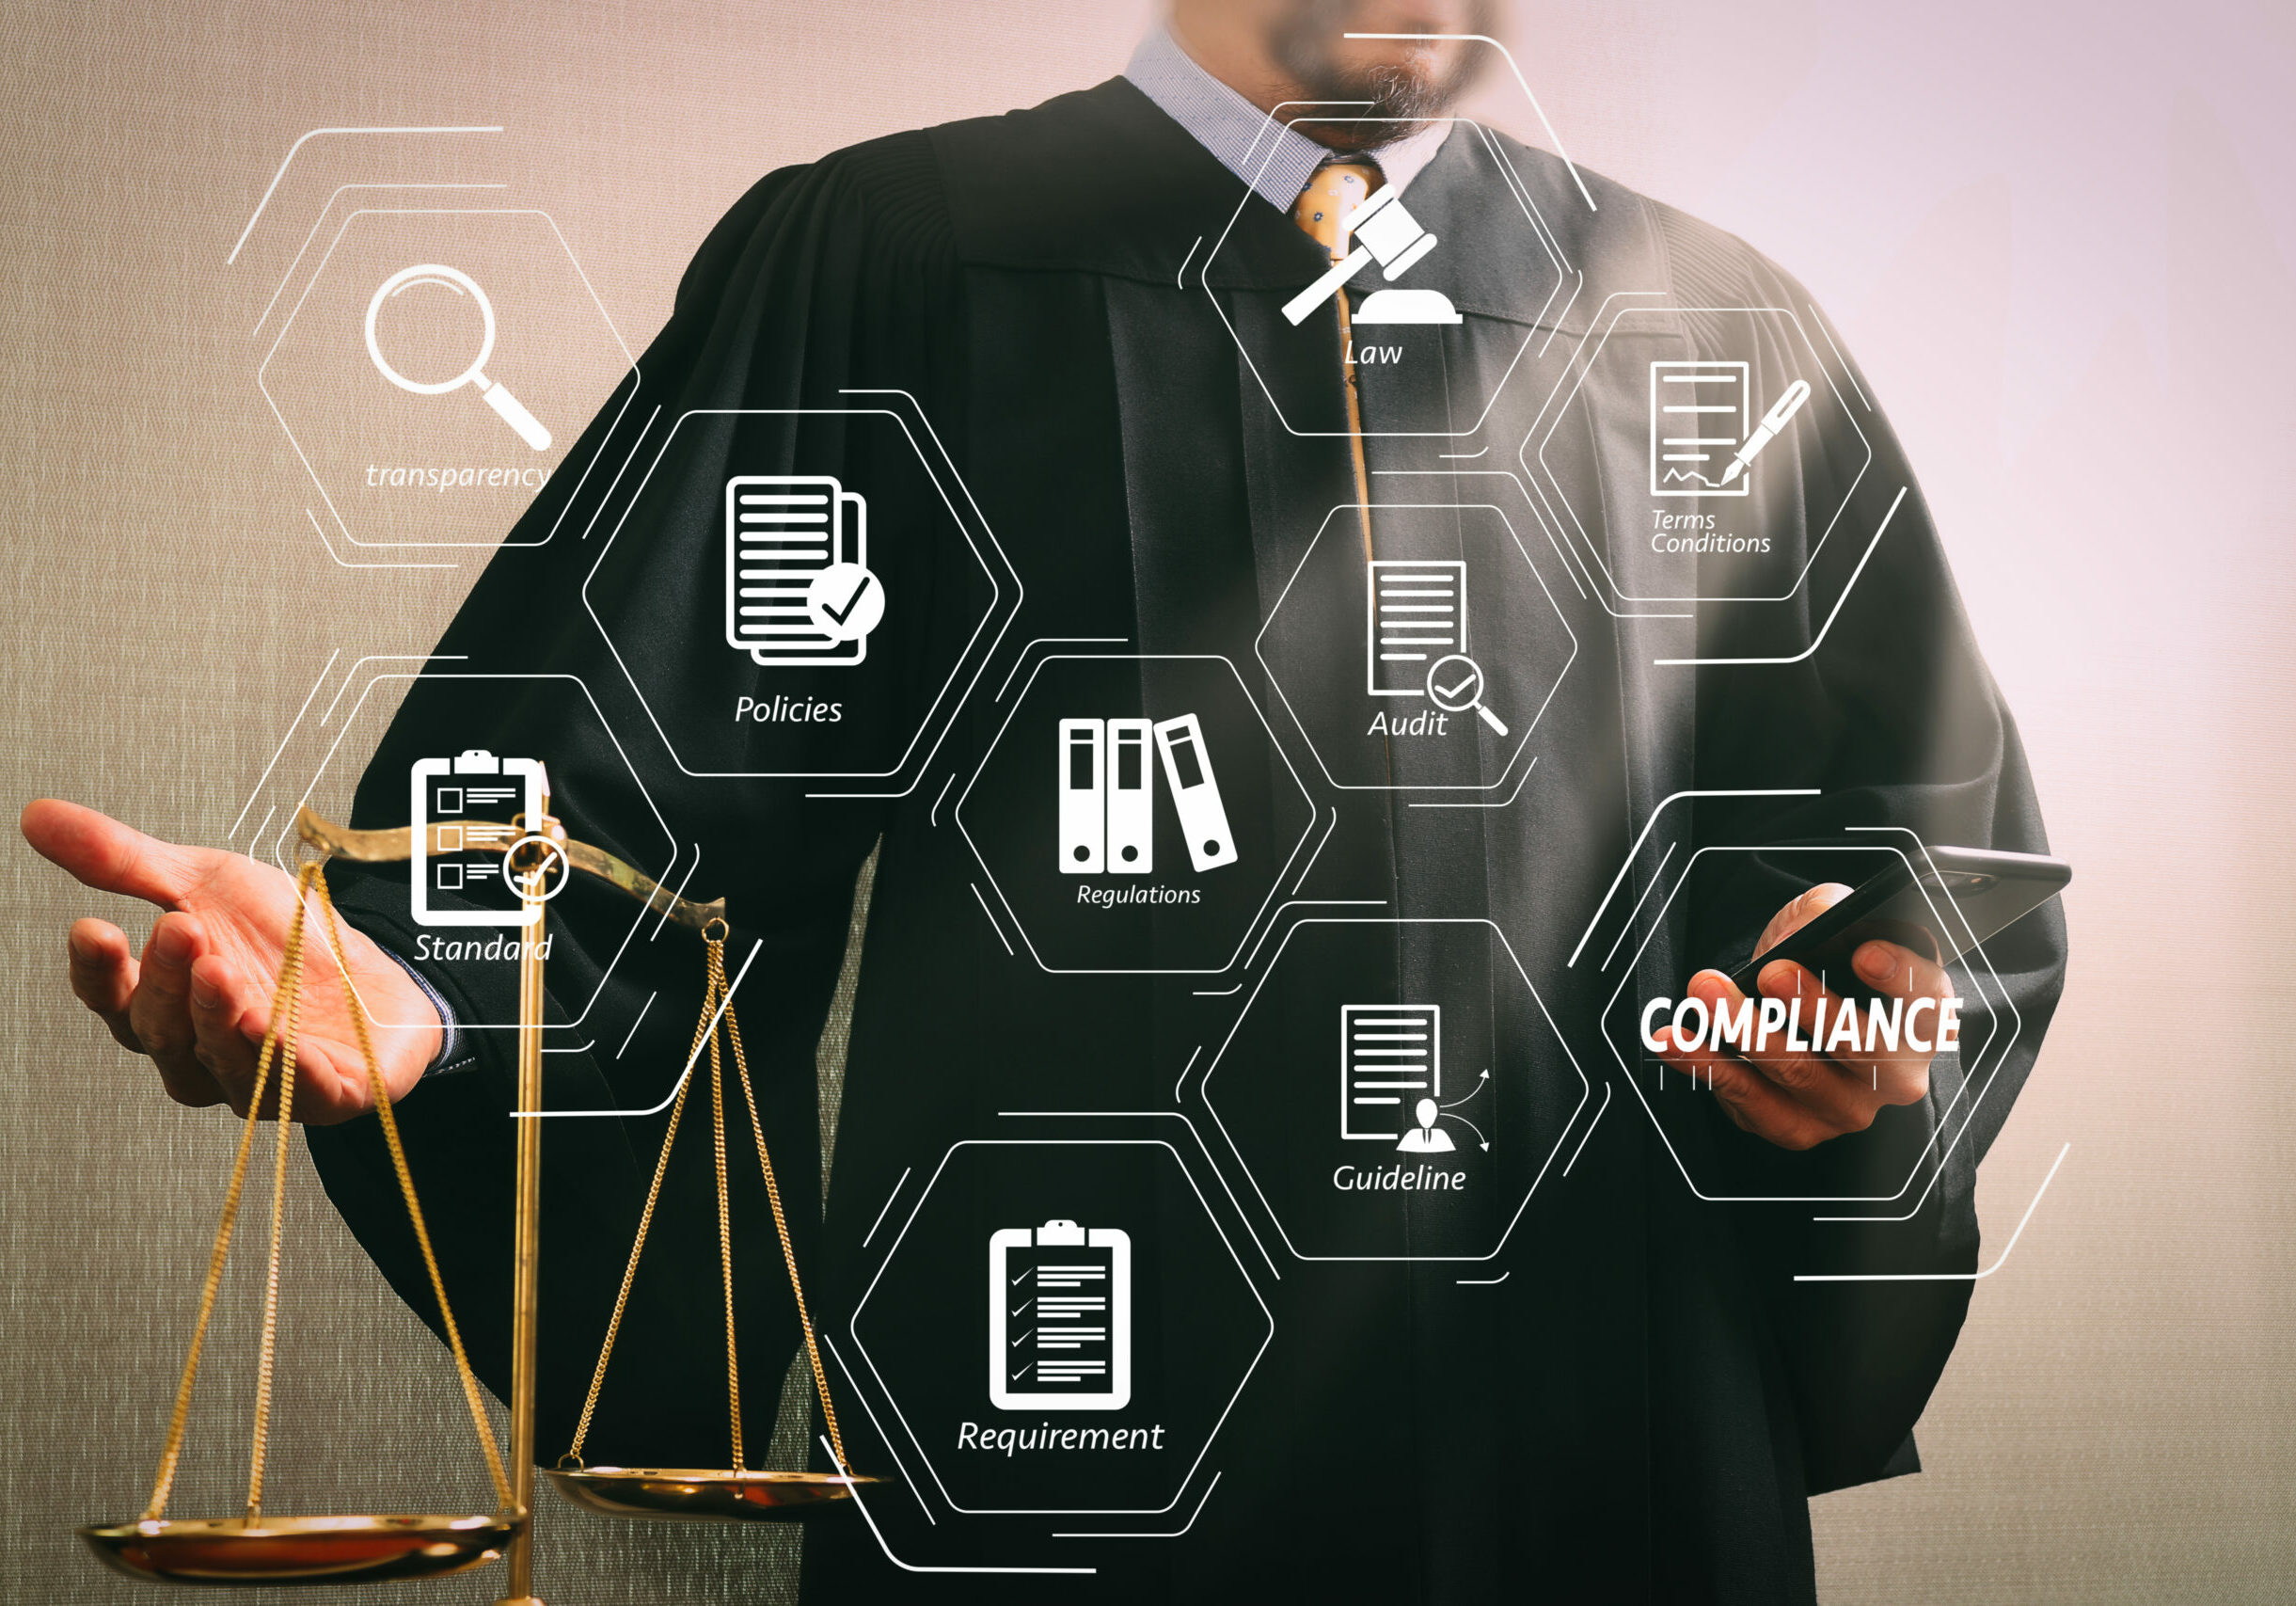 Compliance Virtual Diagram for regulations, law, standards, requirements and audit.Male judge in a courtroom with the balance scale and using smart phone